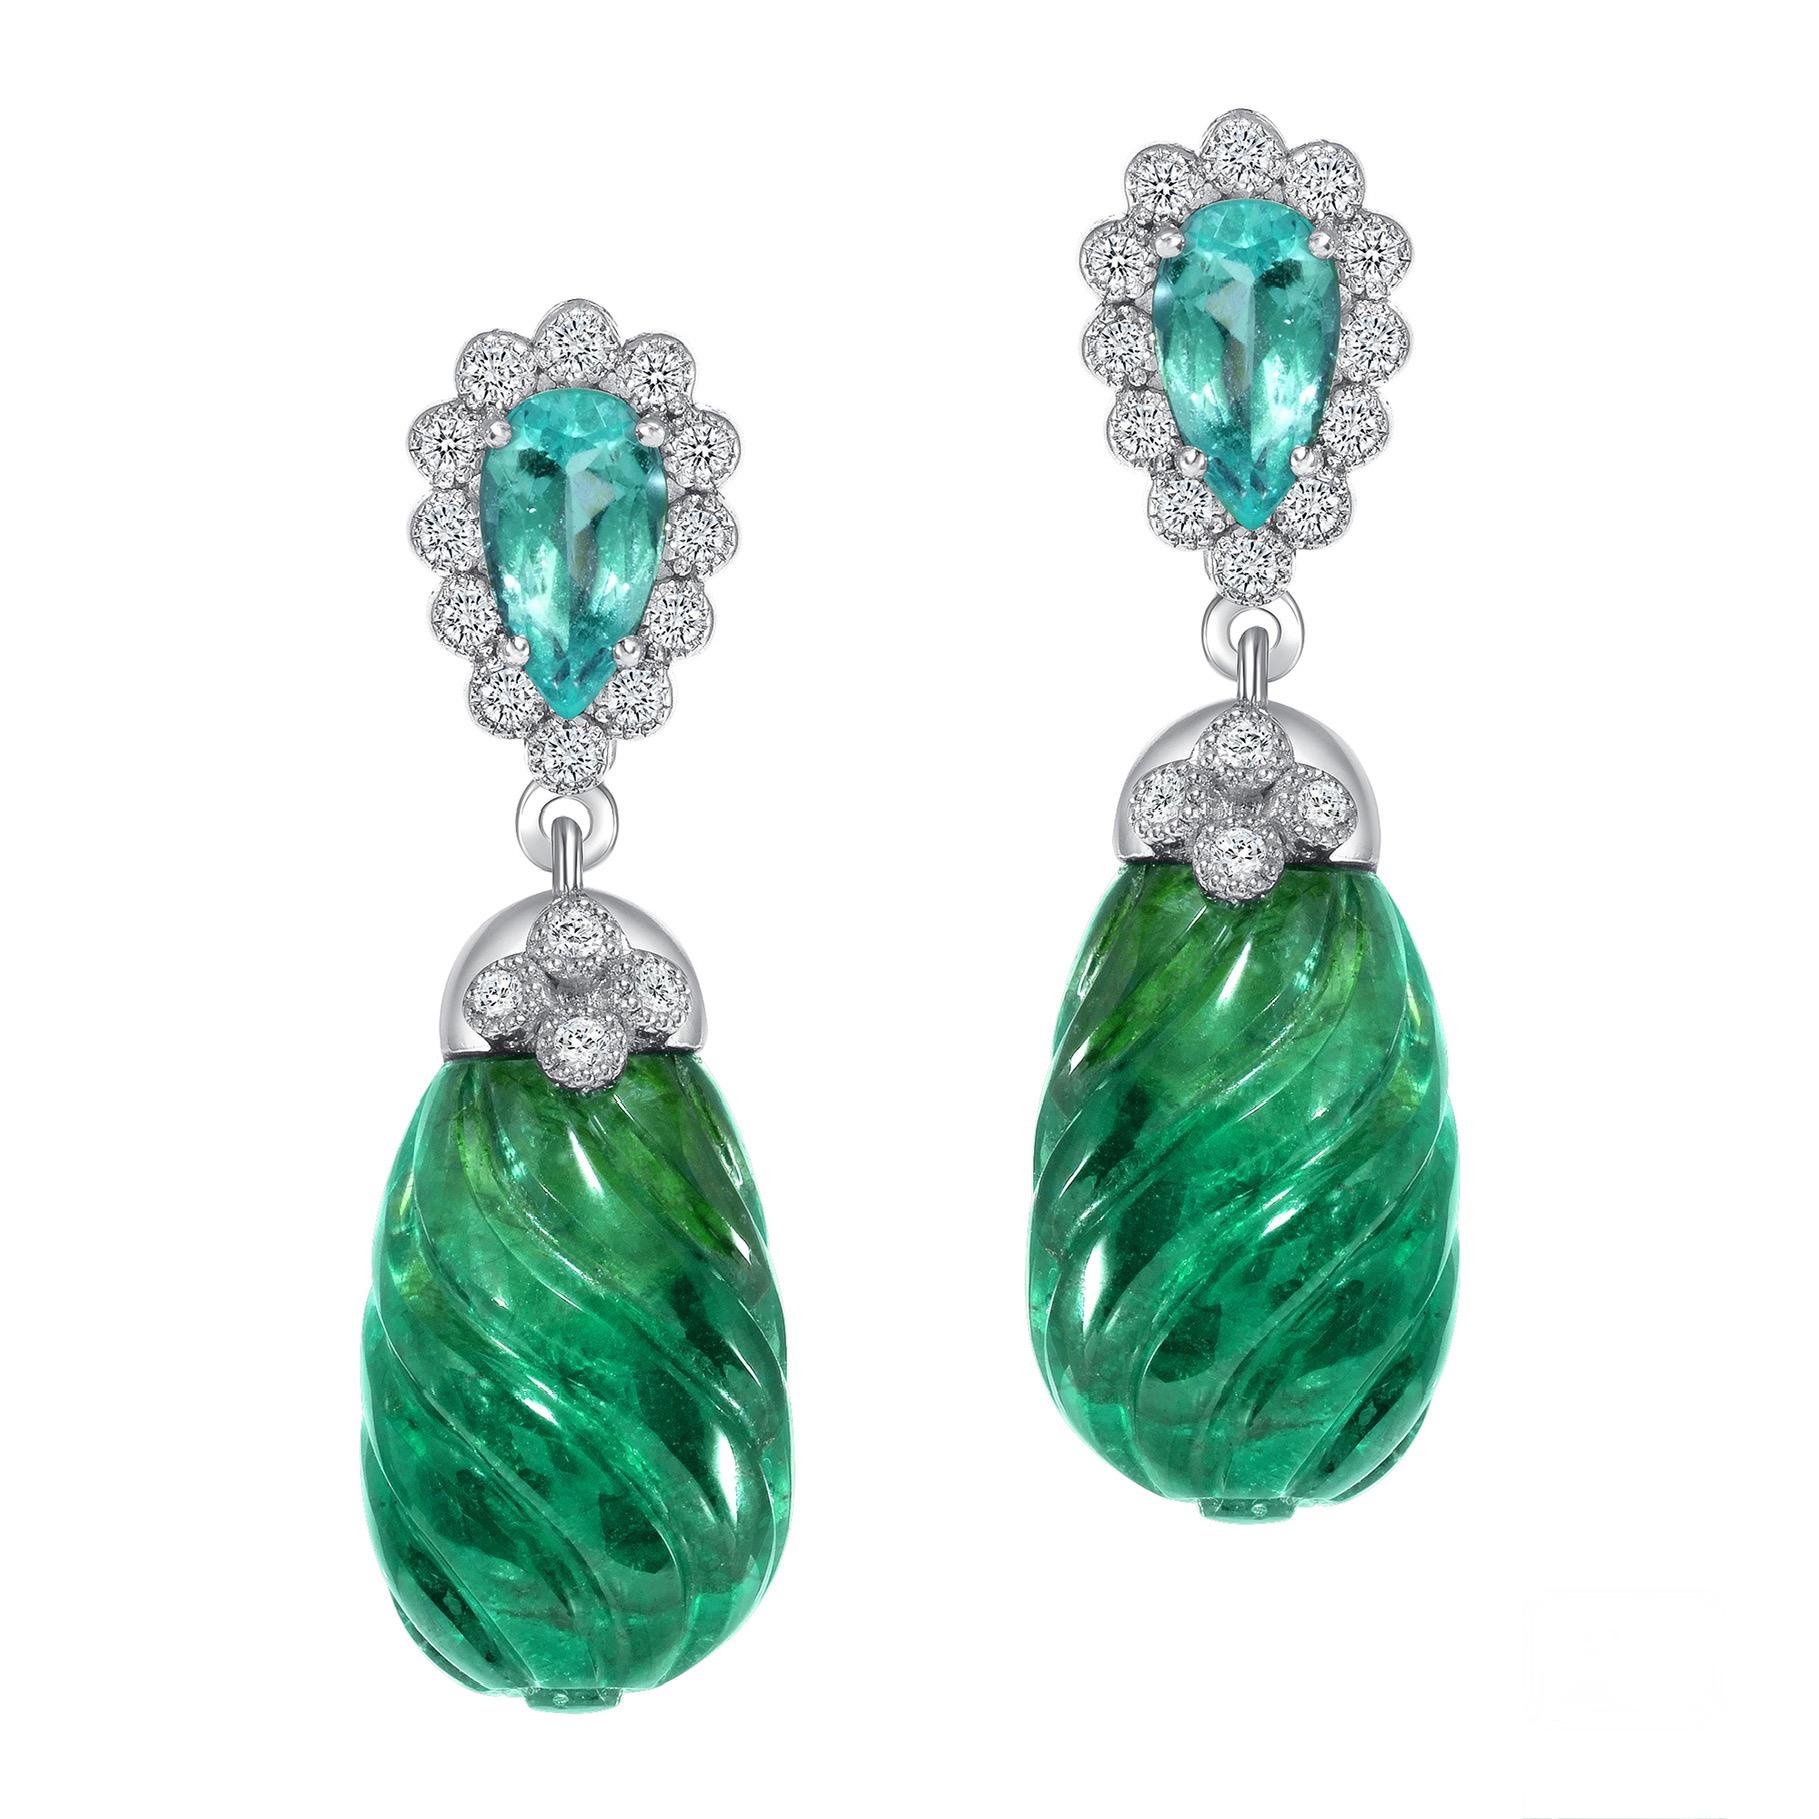 Two carved Zambian Emeralds weighing 20.77 carats are accompanied by two Paraiba-type Mozambique tourmalines totaling 0.71 carats. Each earring glows beautifully and are just mesmerizing together with icy white diamonds weighing a total of 0.40